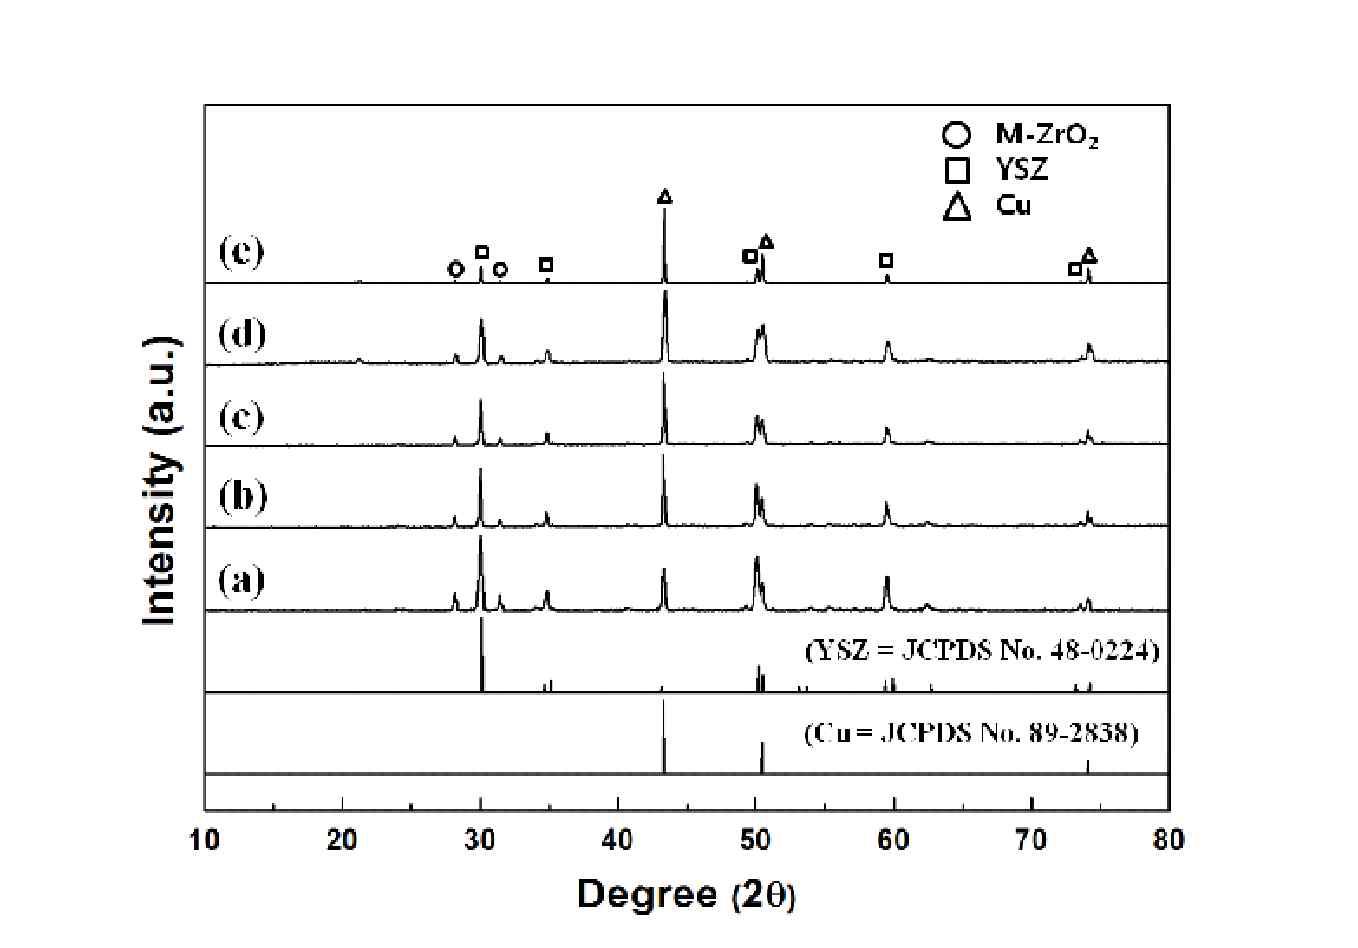 XRD patterns of the samples sintered at 1,100 °C for 3 h followed by reduced at 800 °C for 3 h: (a) Sample 30AC, (b) Sample 40AC, (c) Sample 50AC, (d) Sample 60AC, and (e) Sample 70AC.